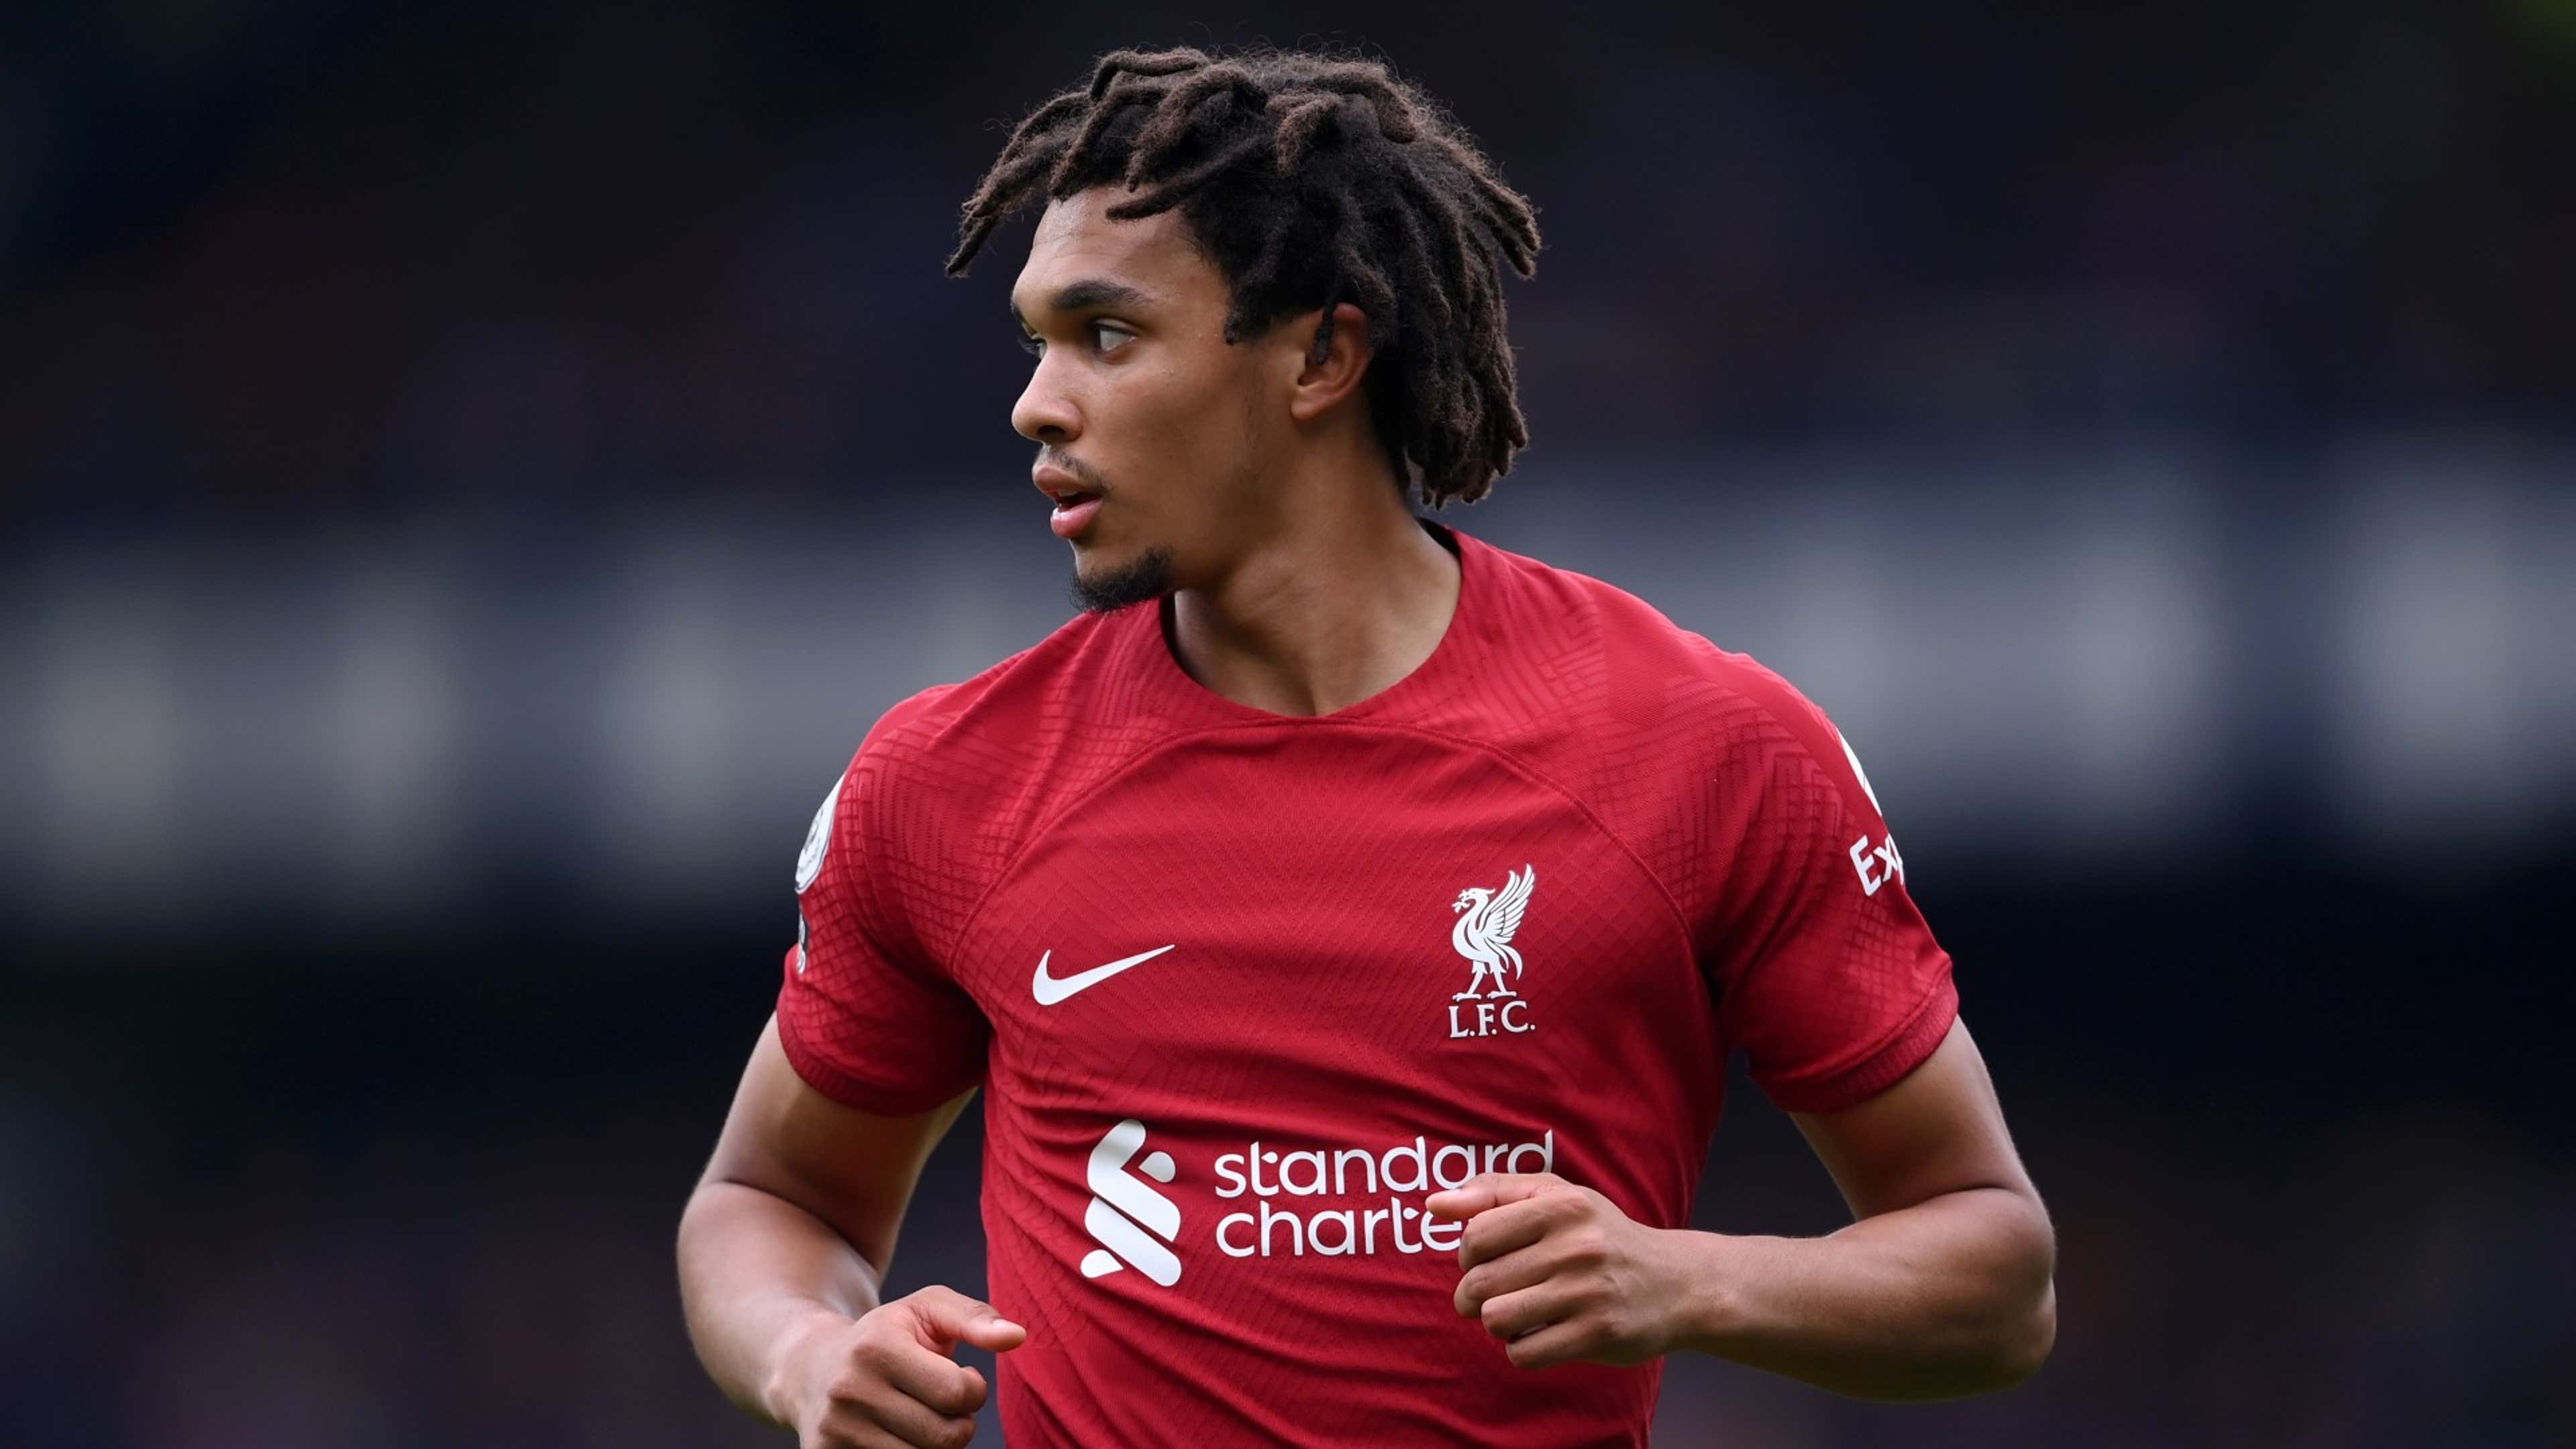 Defensively, Alexander-Arnold Championship level' - Ex-Chelsea defender Leboeuf on how Liverpool star and other fullbacks have been 'deformed' by Carlos | Goal.com